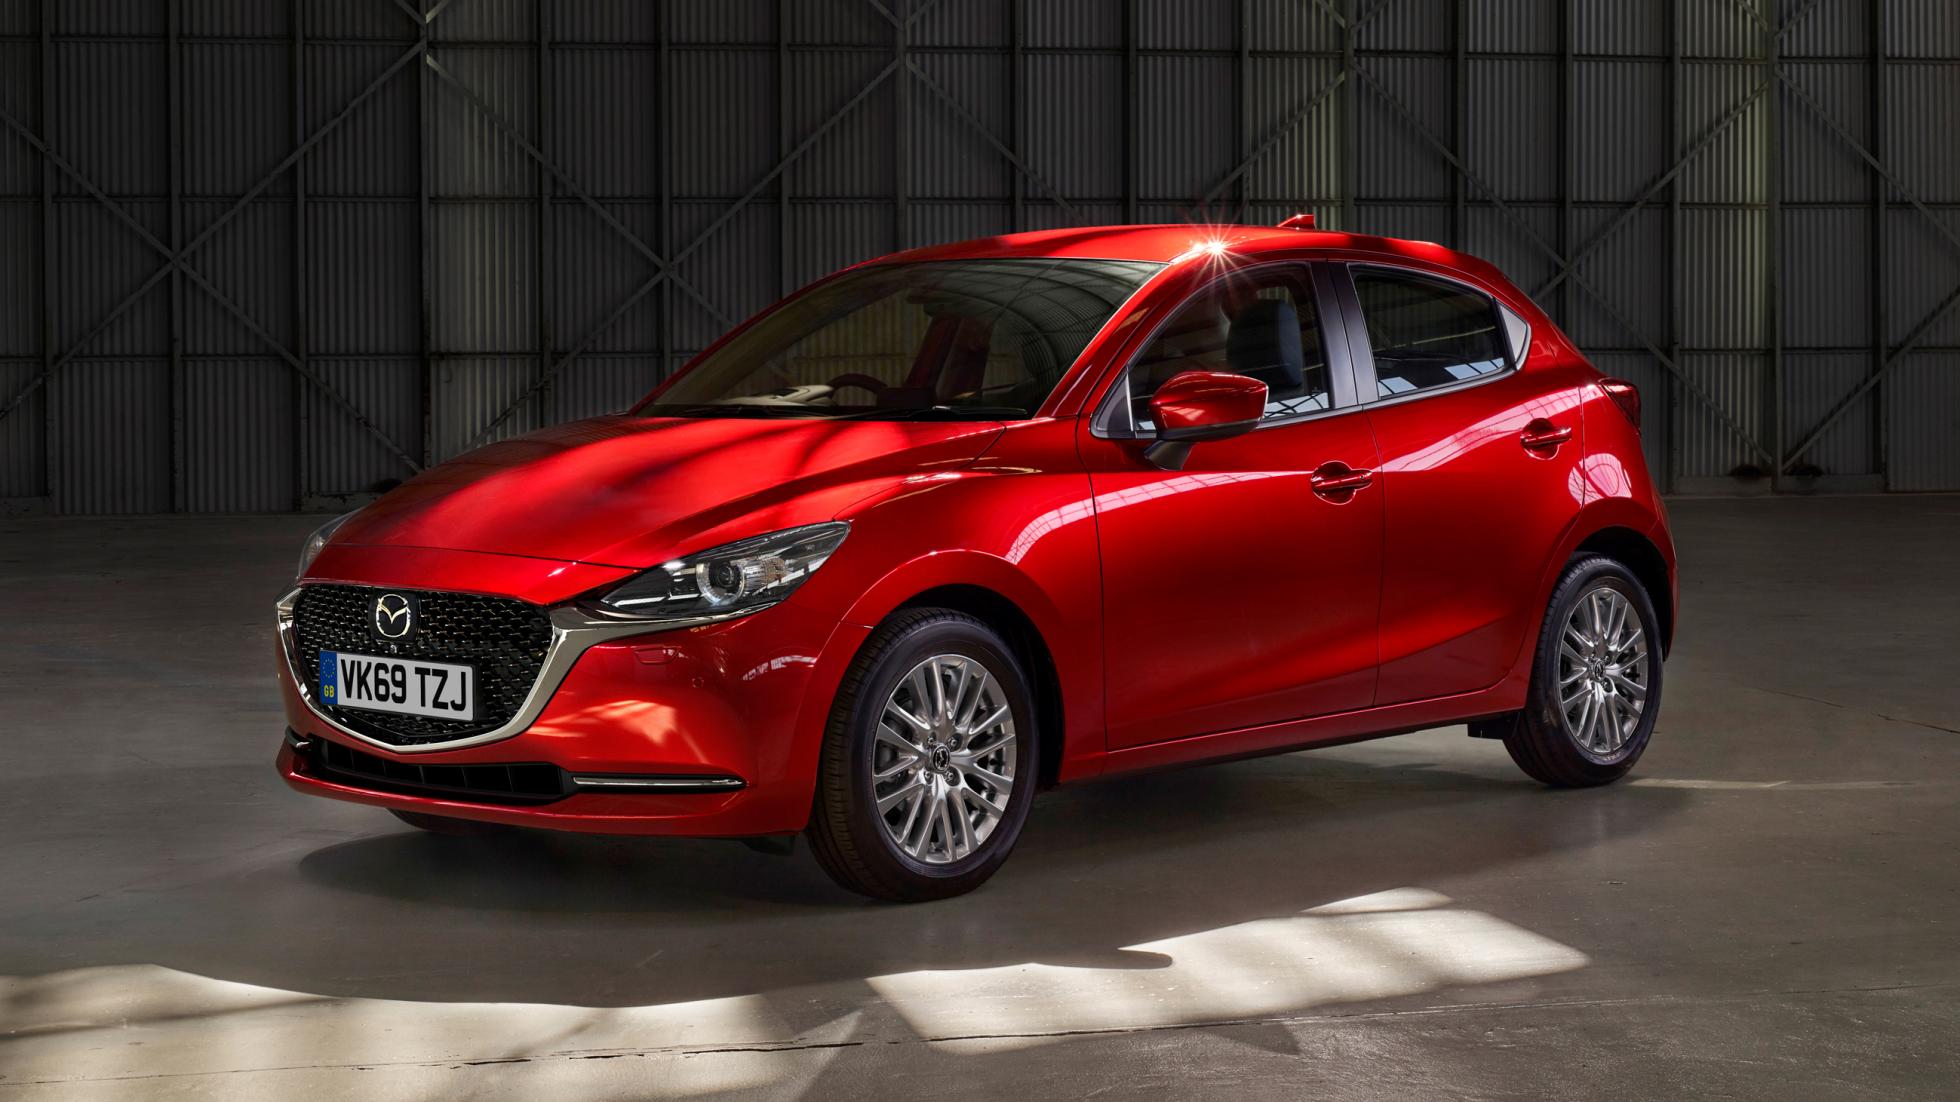 The updated Mazda 2 is a handsome, petrol-only supermini for the UK